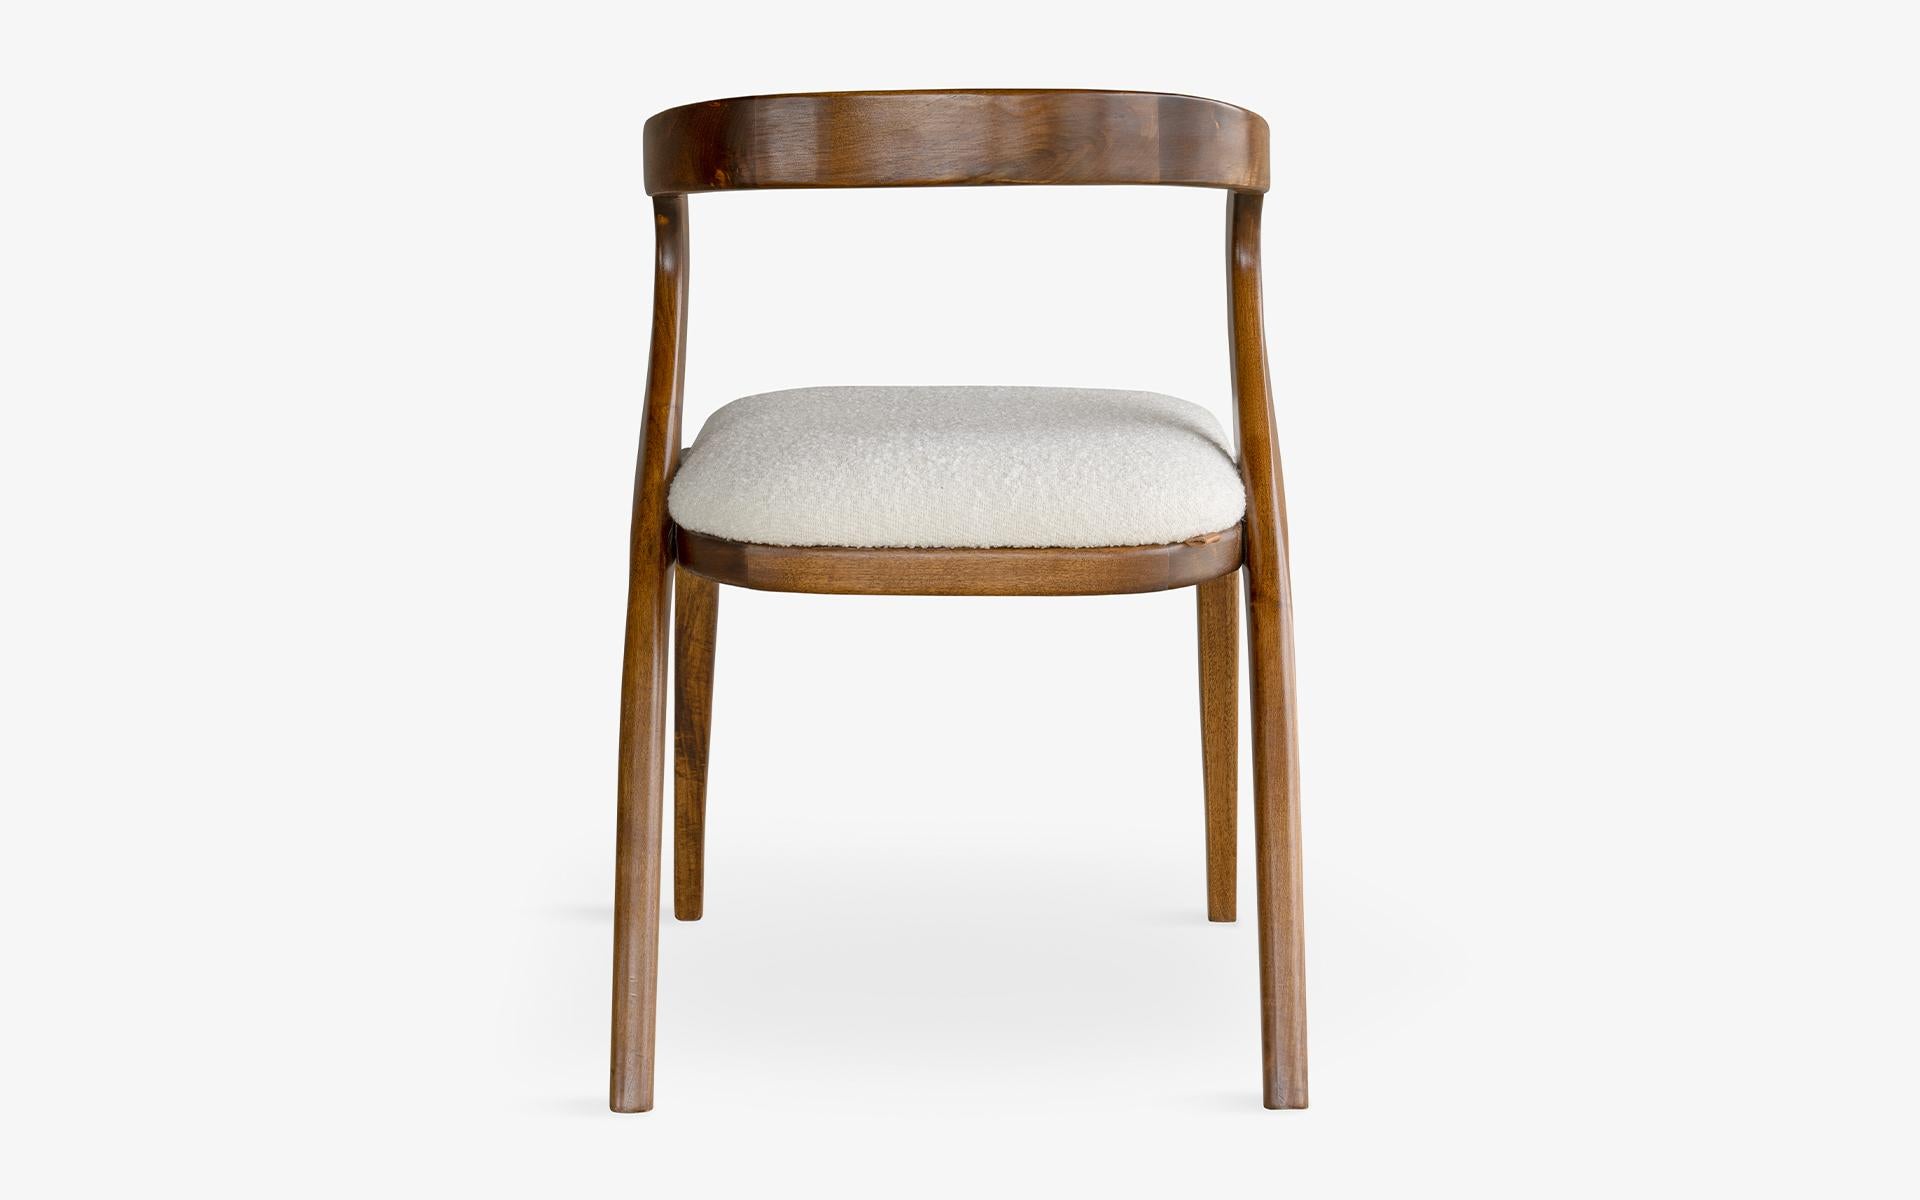 Upholstery Nana Wooden Dining Chair, No:1, Lagu Selection For Sale